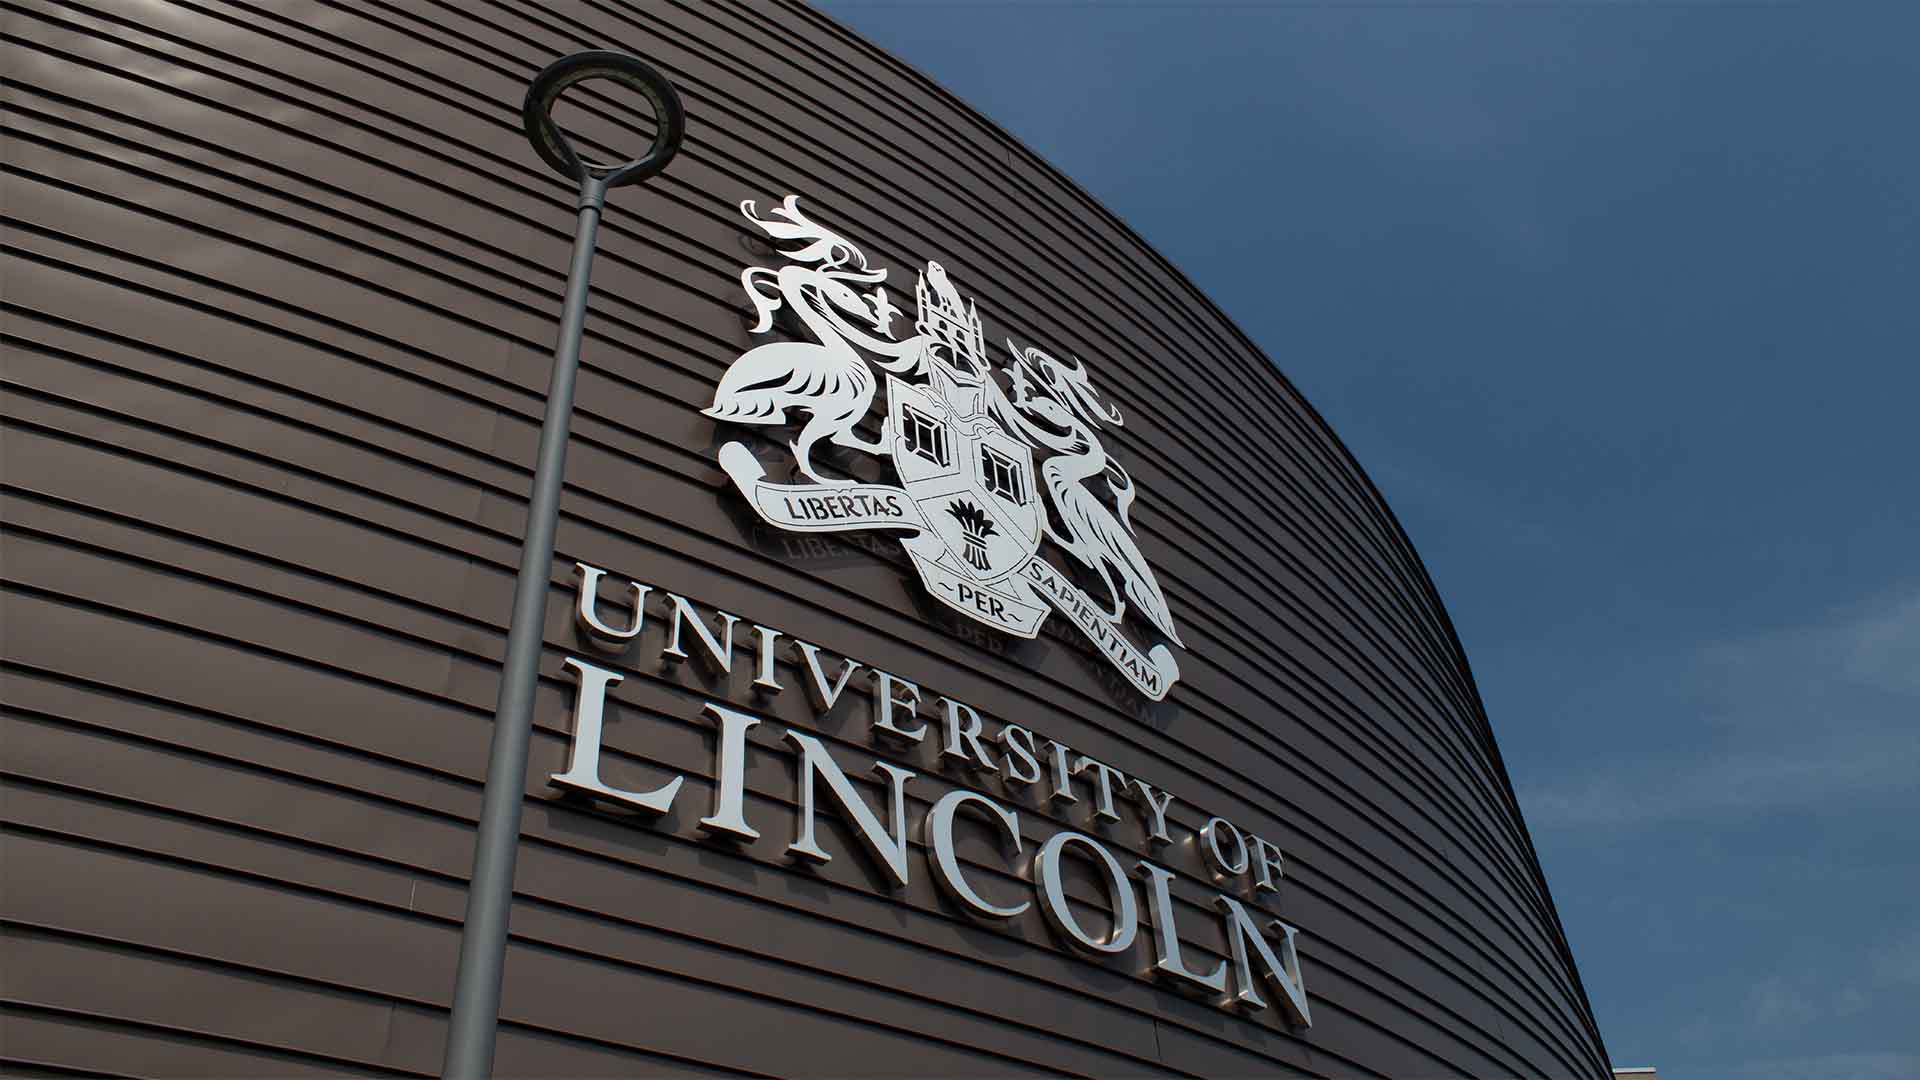 Isaac newton building university of lincoln crest